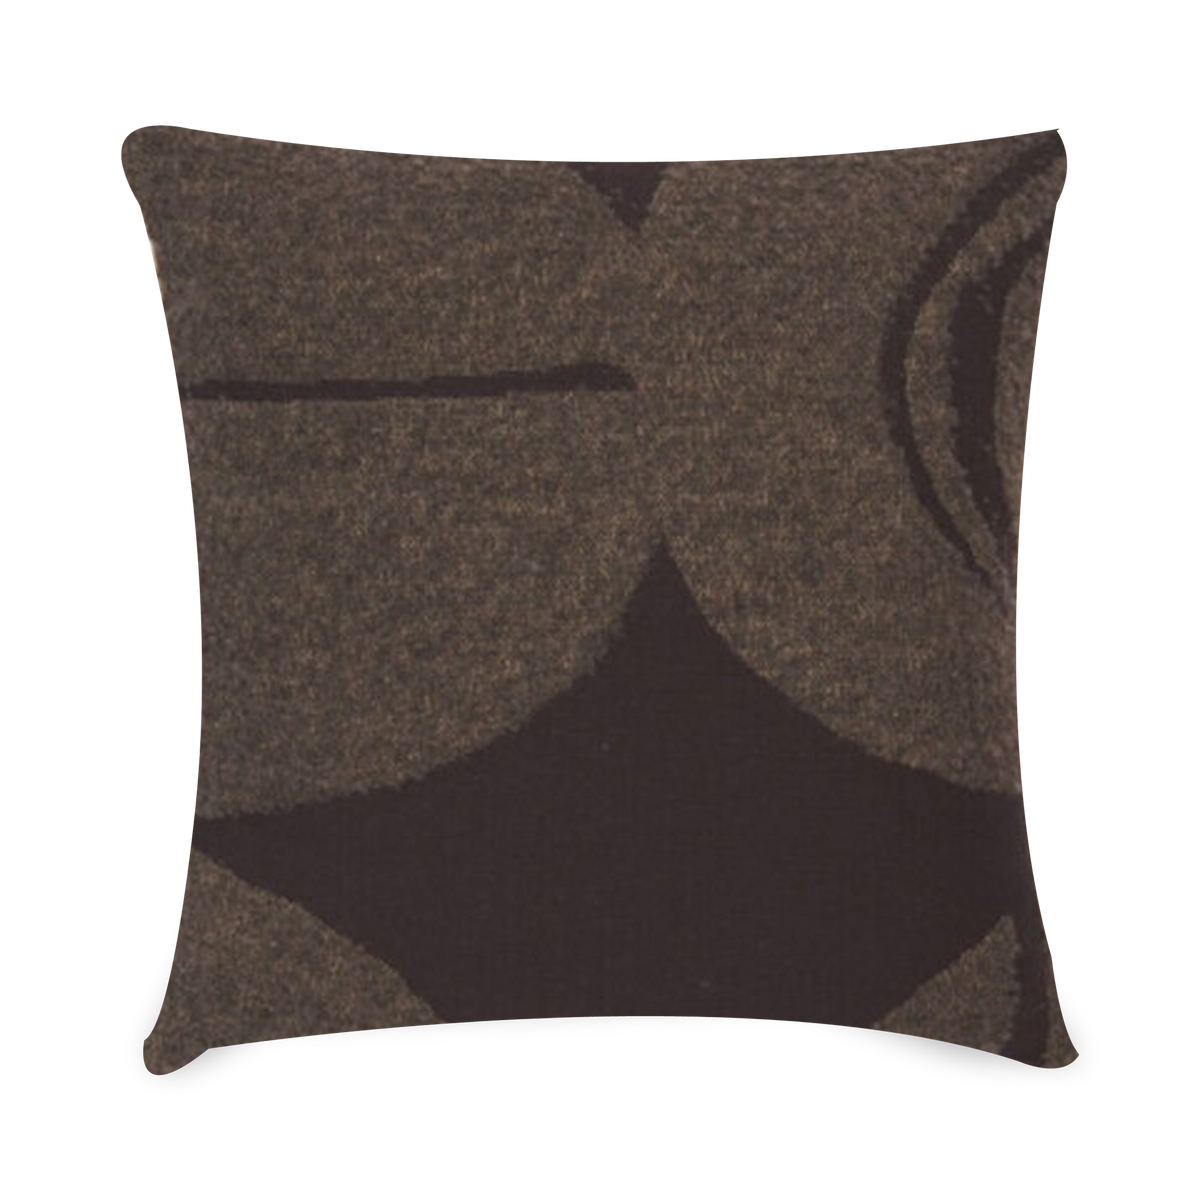 Manufactured in a Belgian family-owned weaving mill, this pillow features abstract patterns for an understated and original look in warm grey tones.